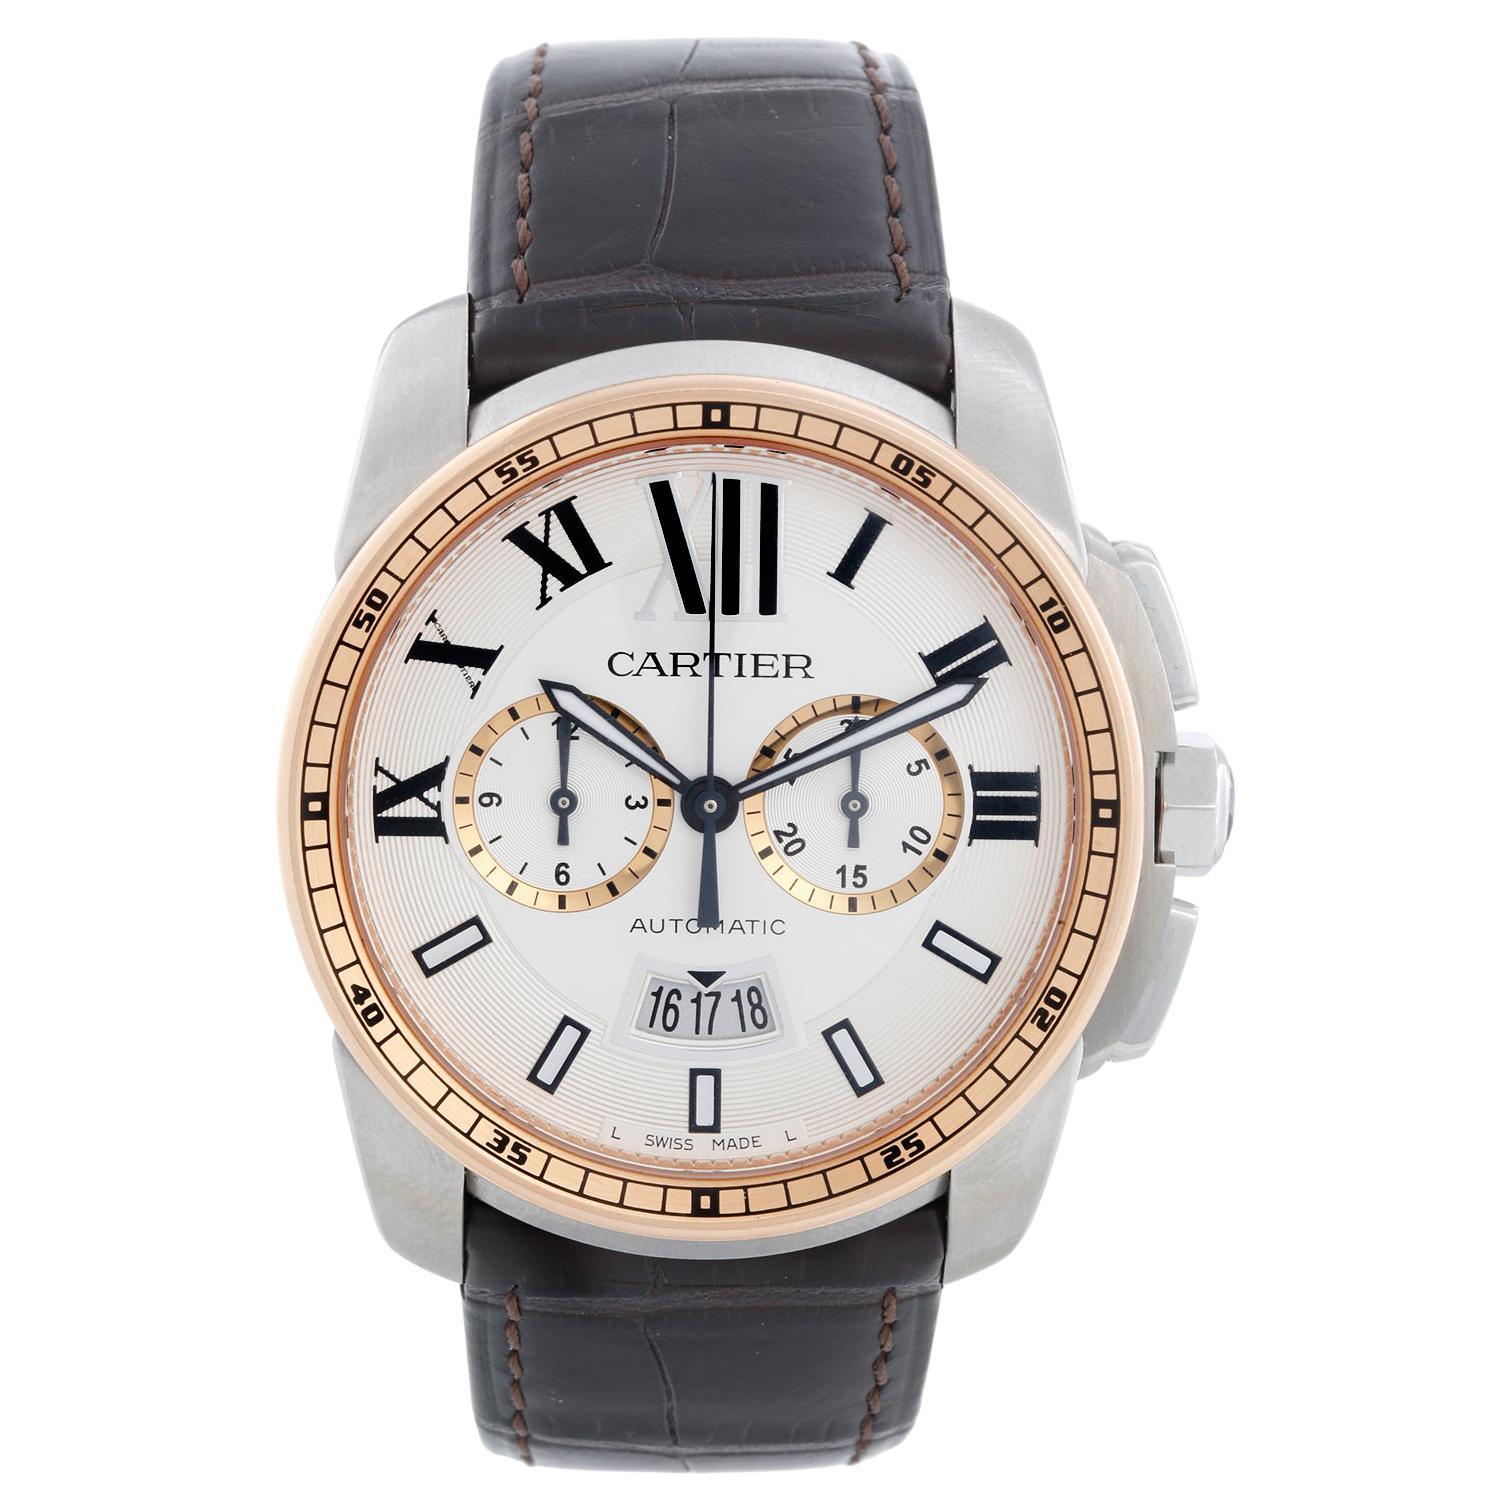 Cartier Calibre Stainless Steel & Rose Gold Men's Watch W7100043 3578